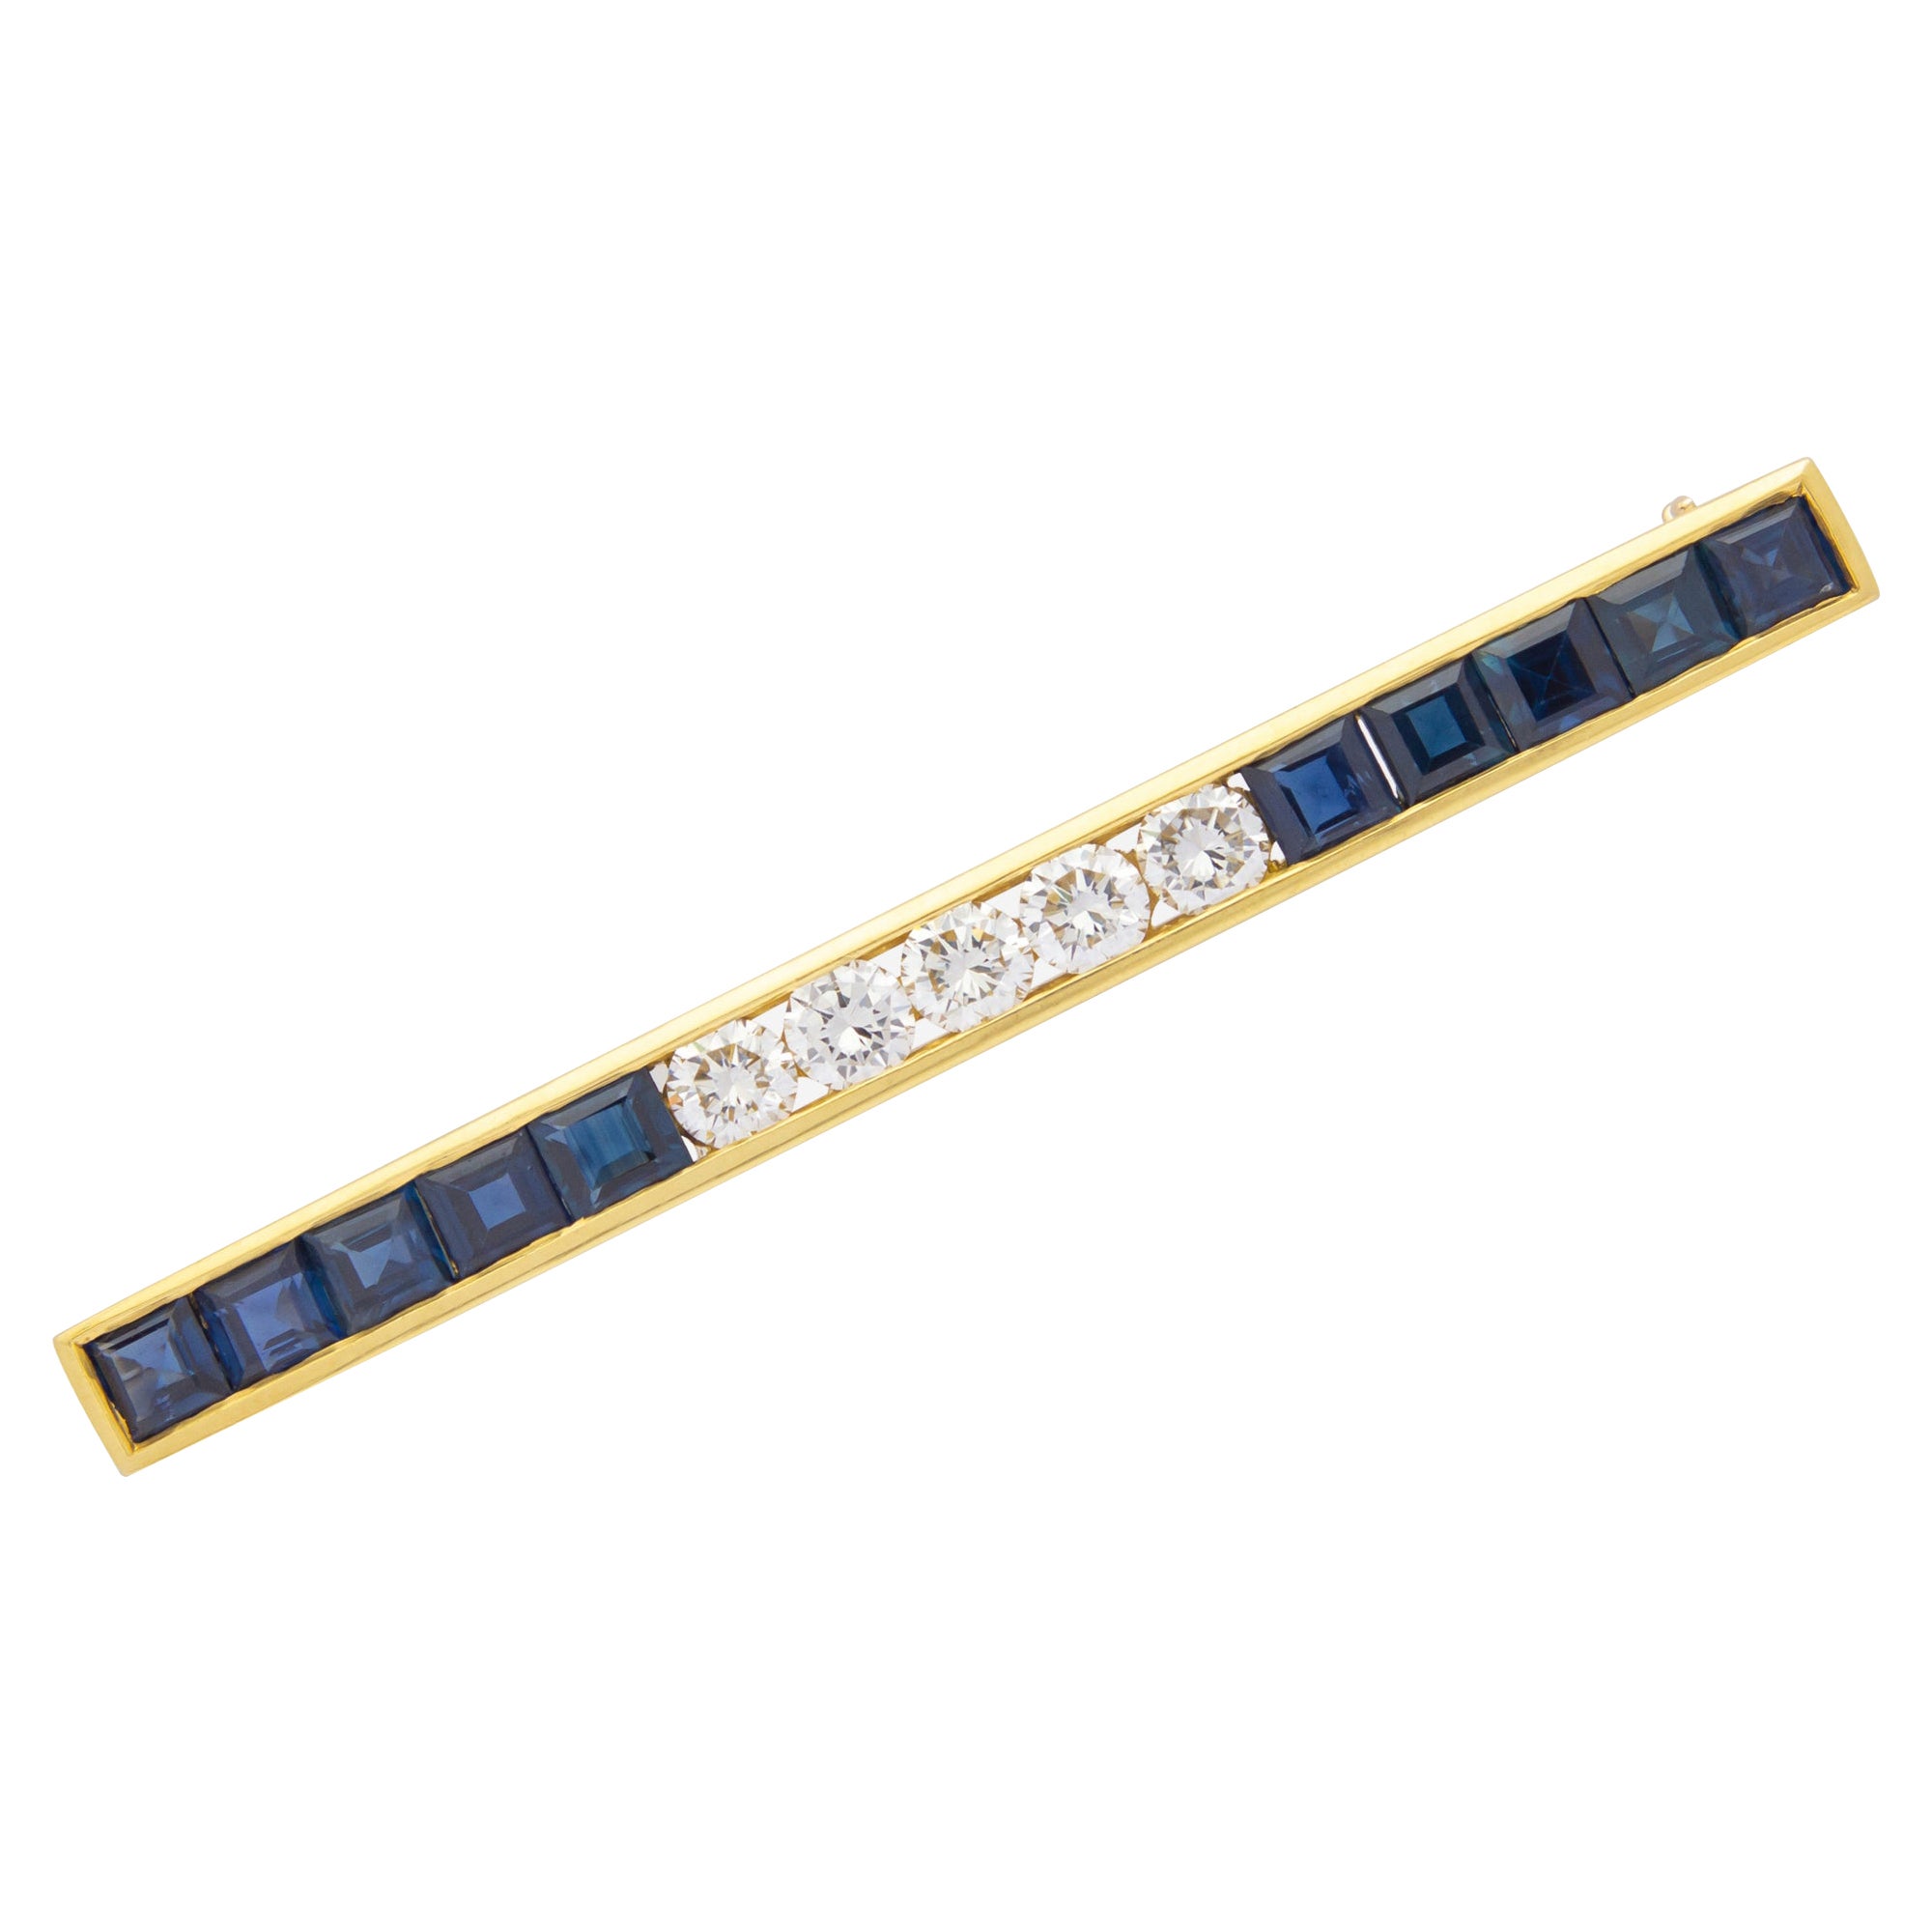 Tiffany & Co Brooch Pin in 18 Karat Gold with Sapphires & Diamonds